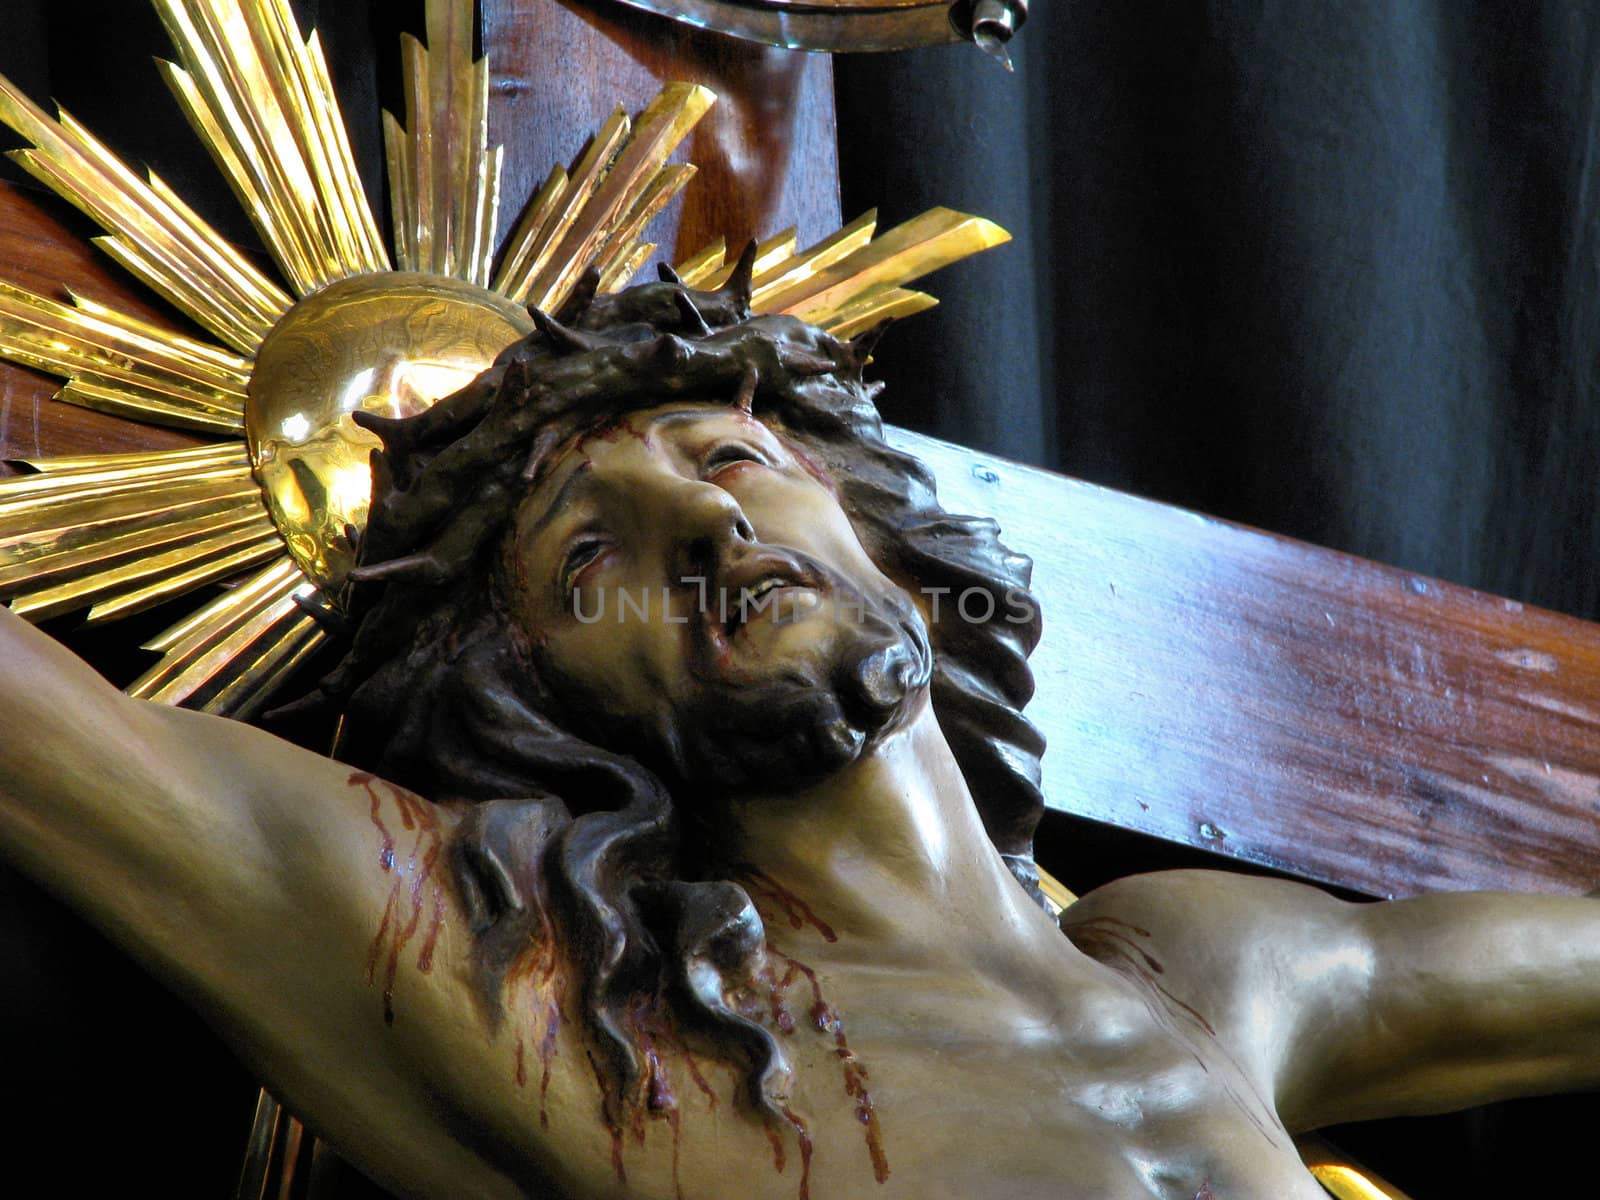 A detail of The Crucifixion in Qormi, Malta.